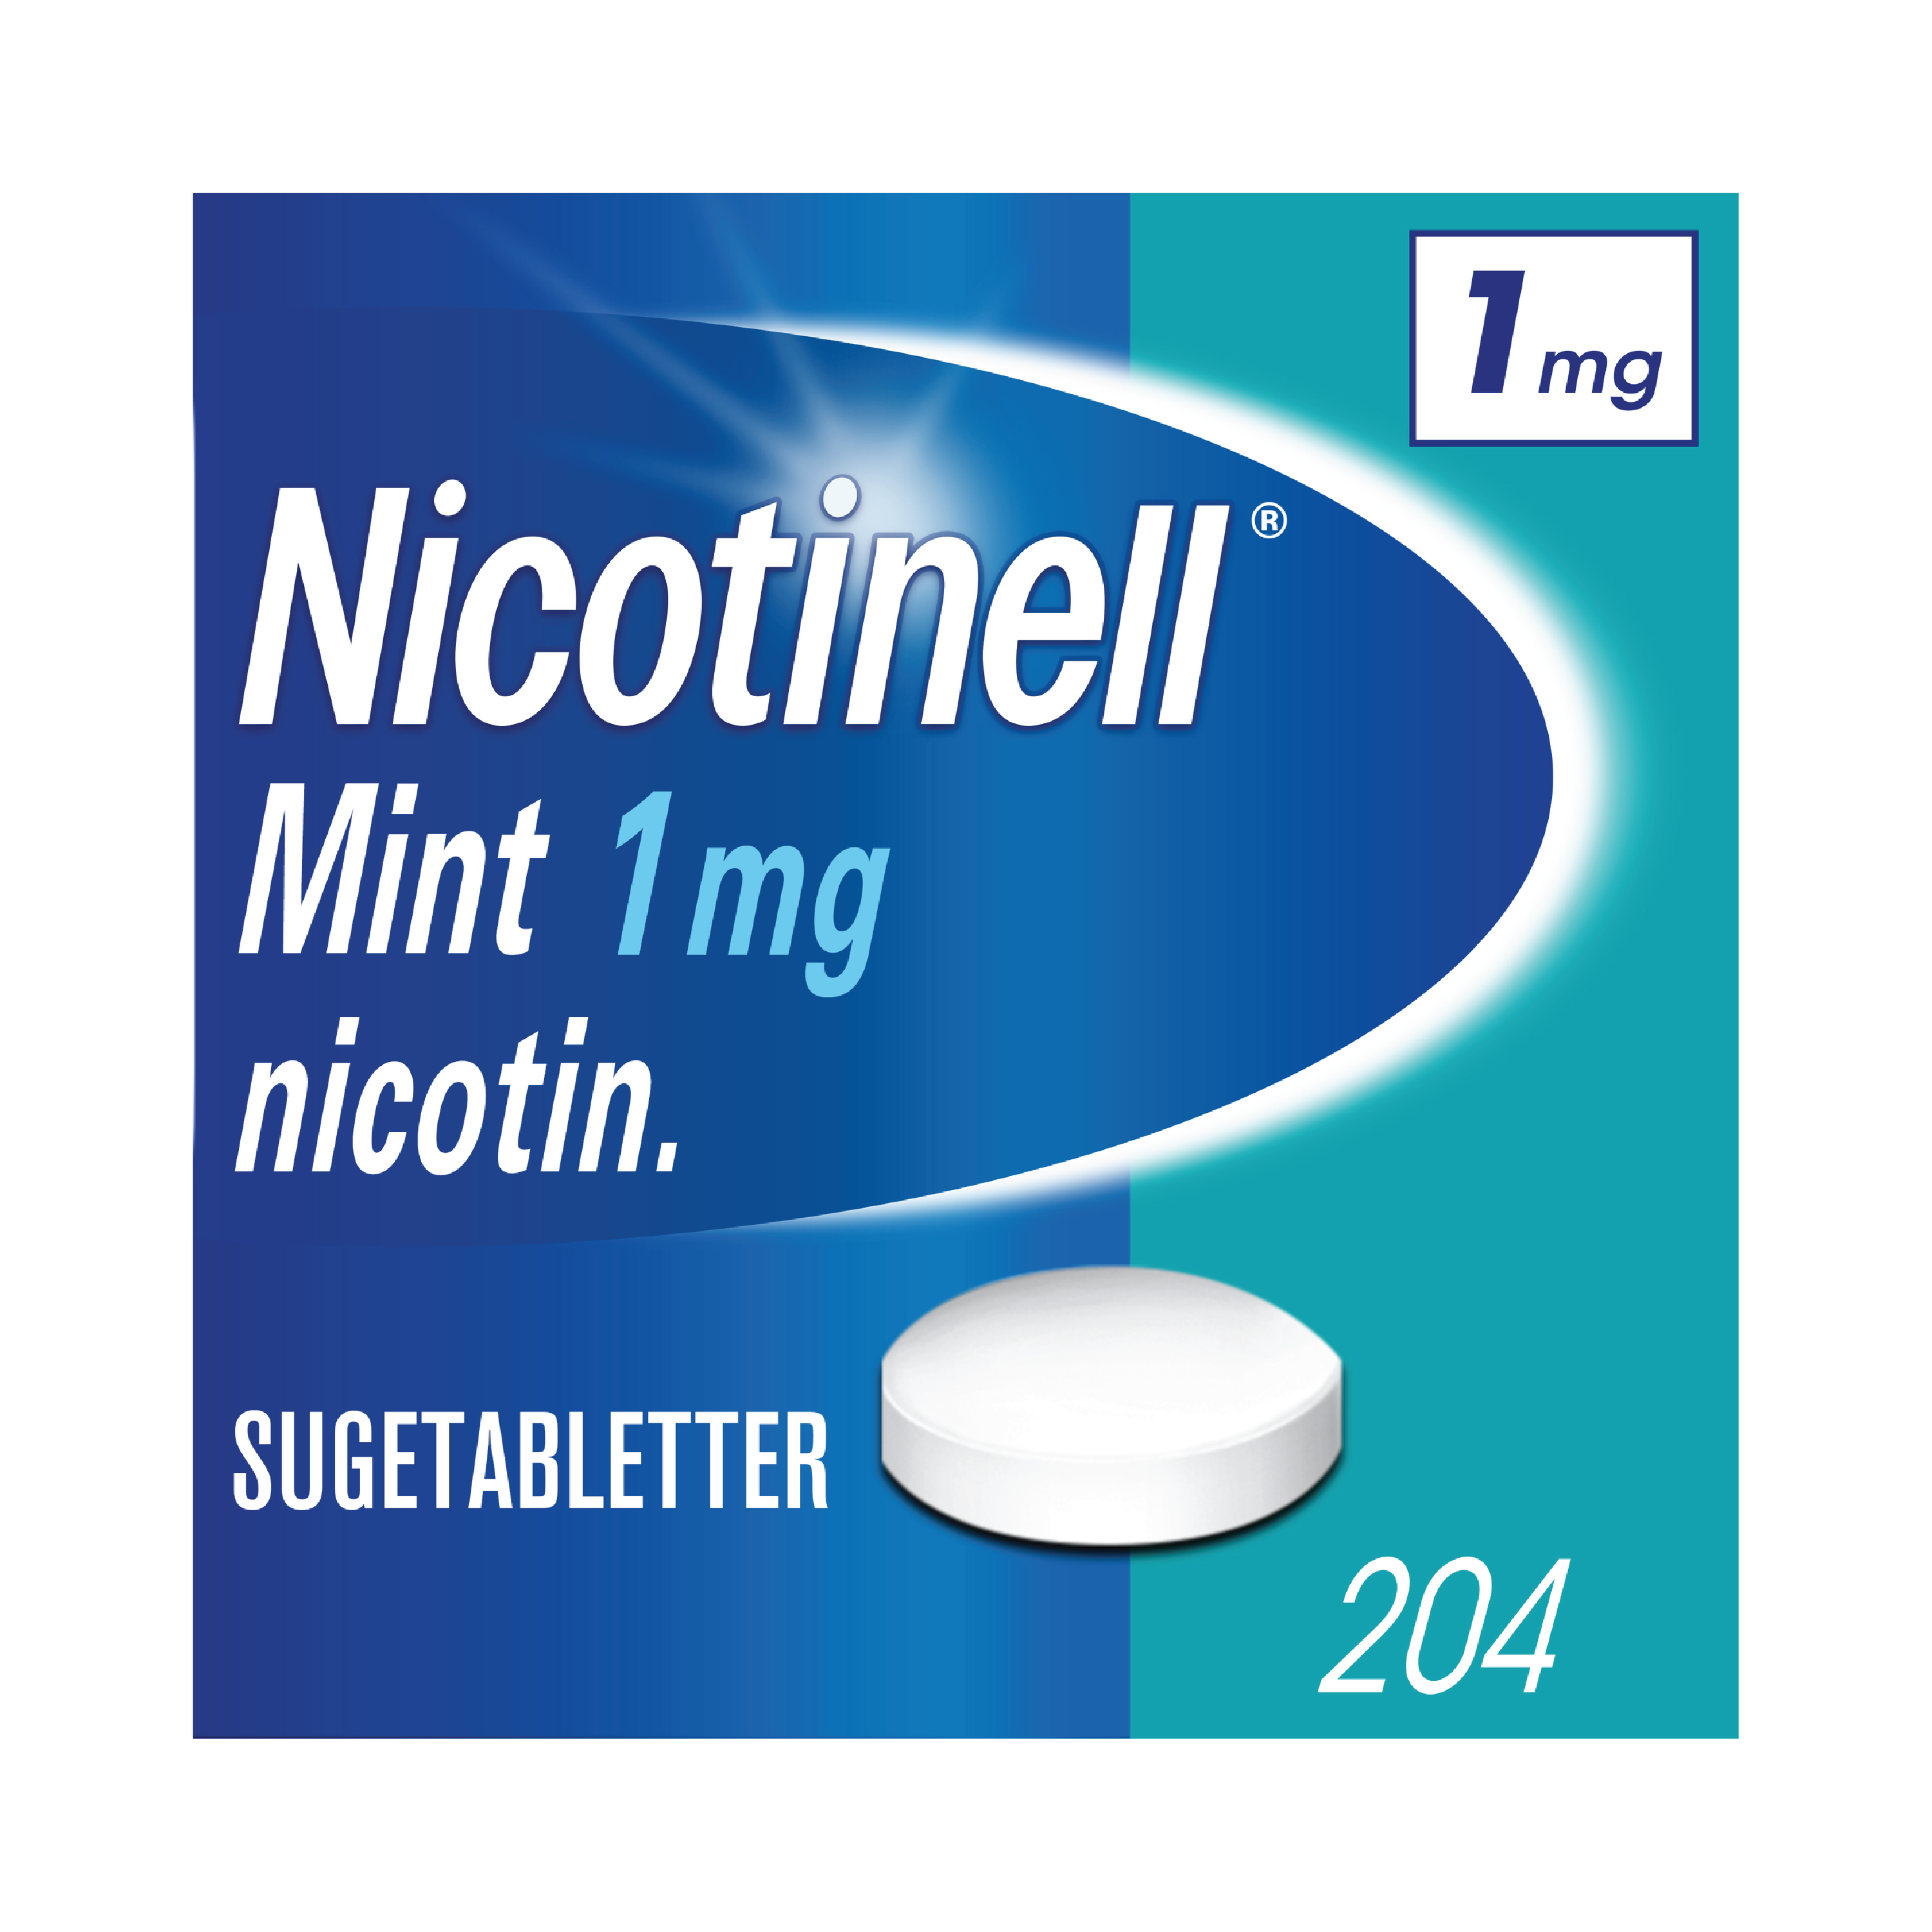 Nicotinell Sugetabletter 1mg, 204 stk.